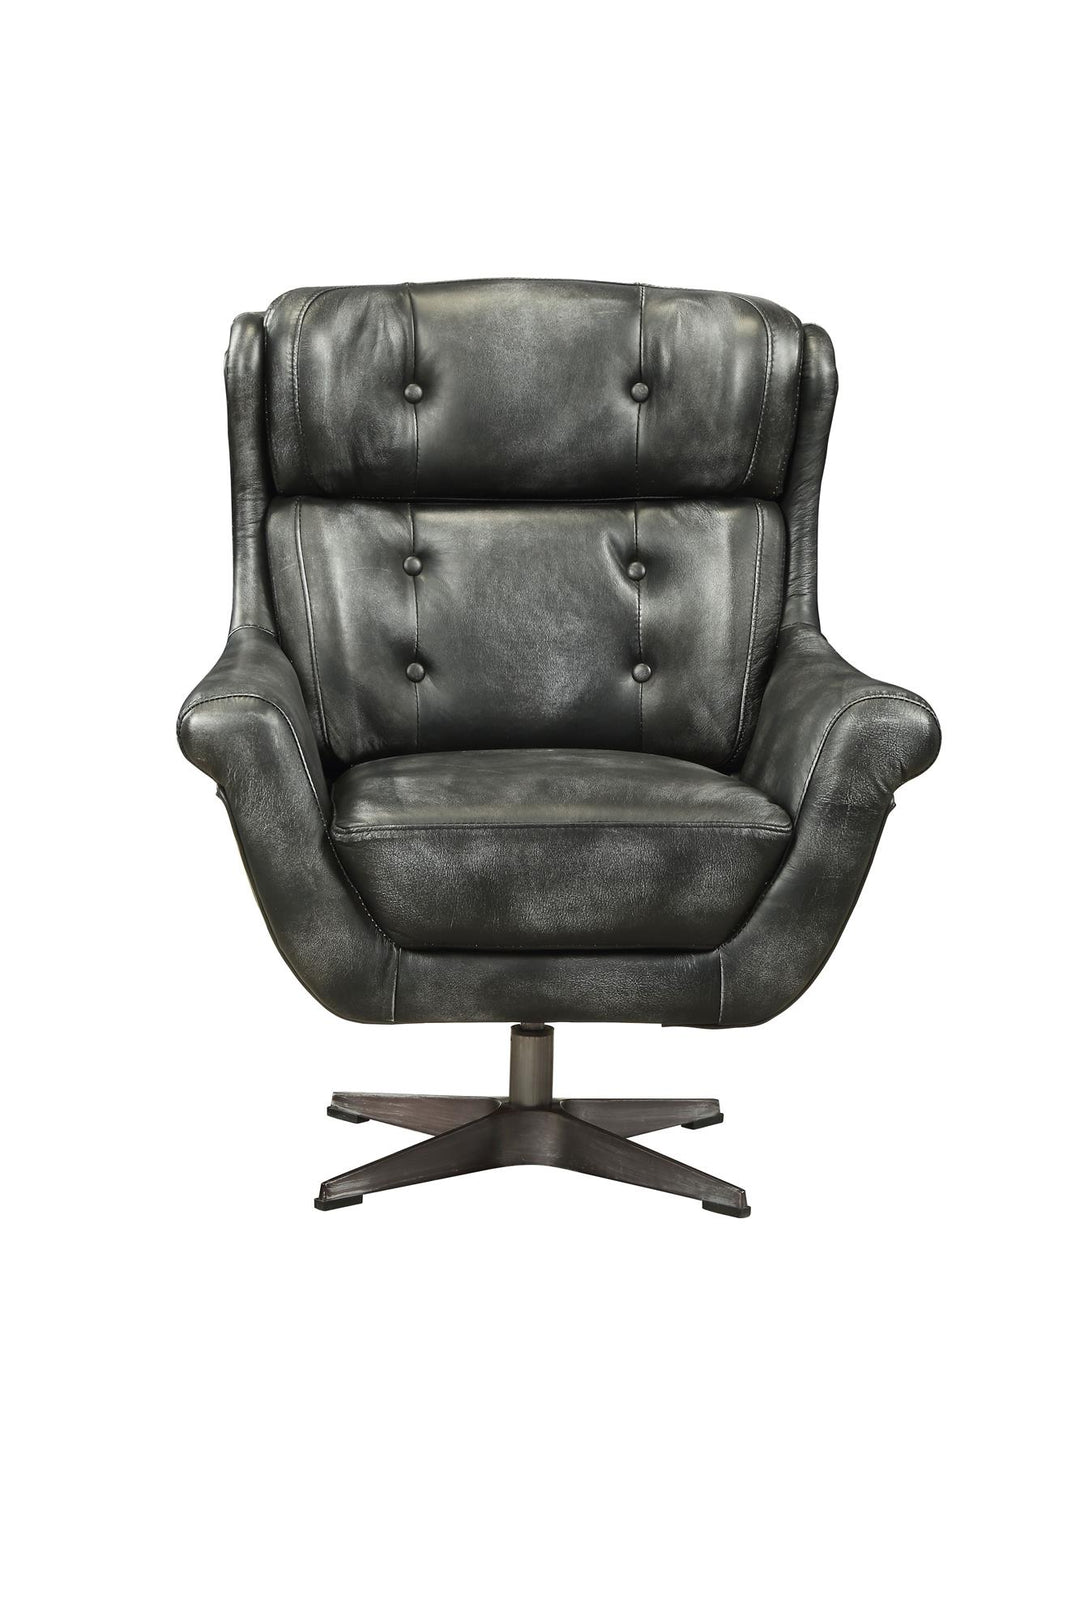 Asotin Accent Chair with Swivel Base - Black